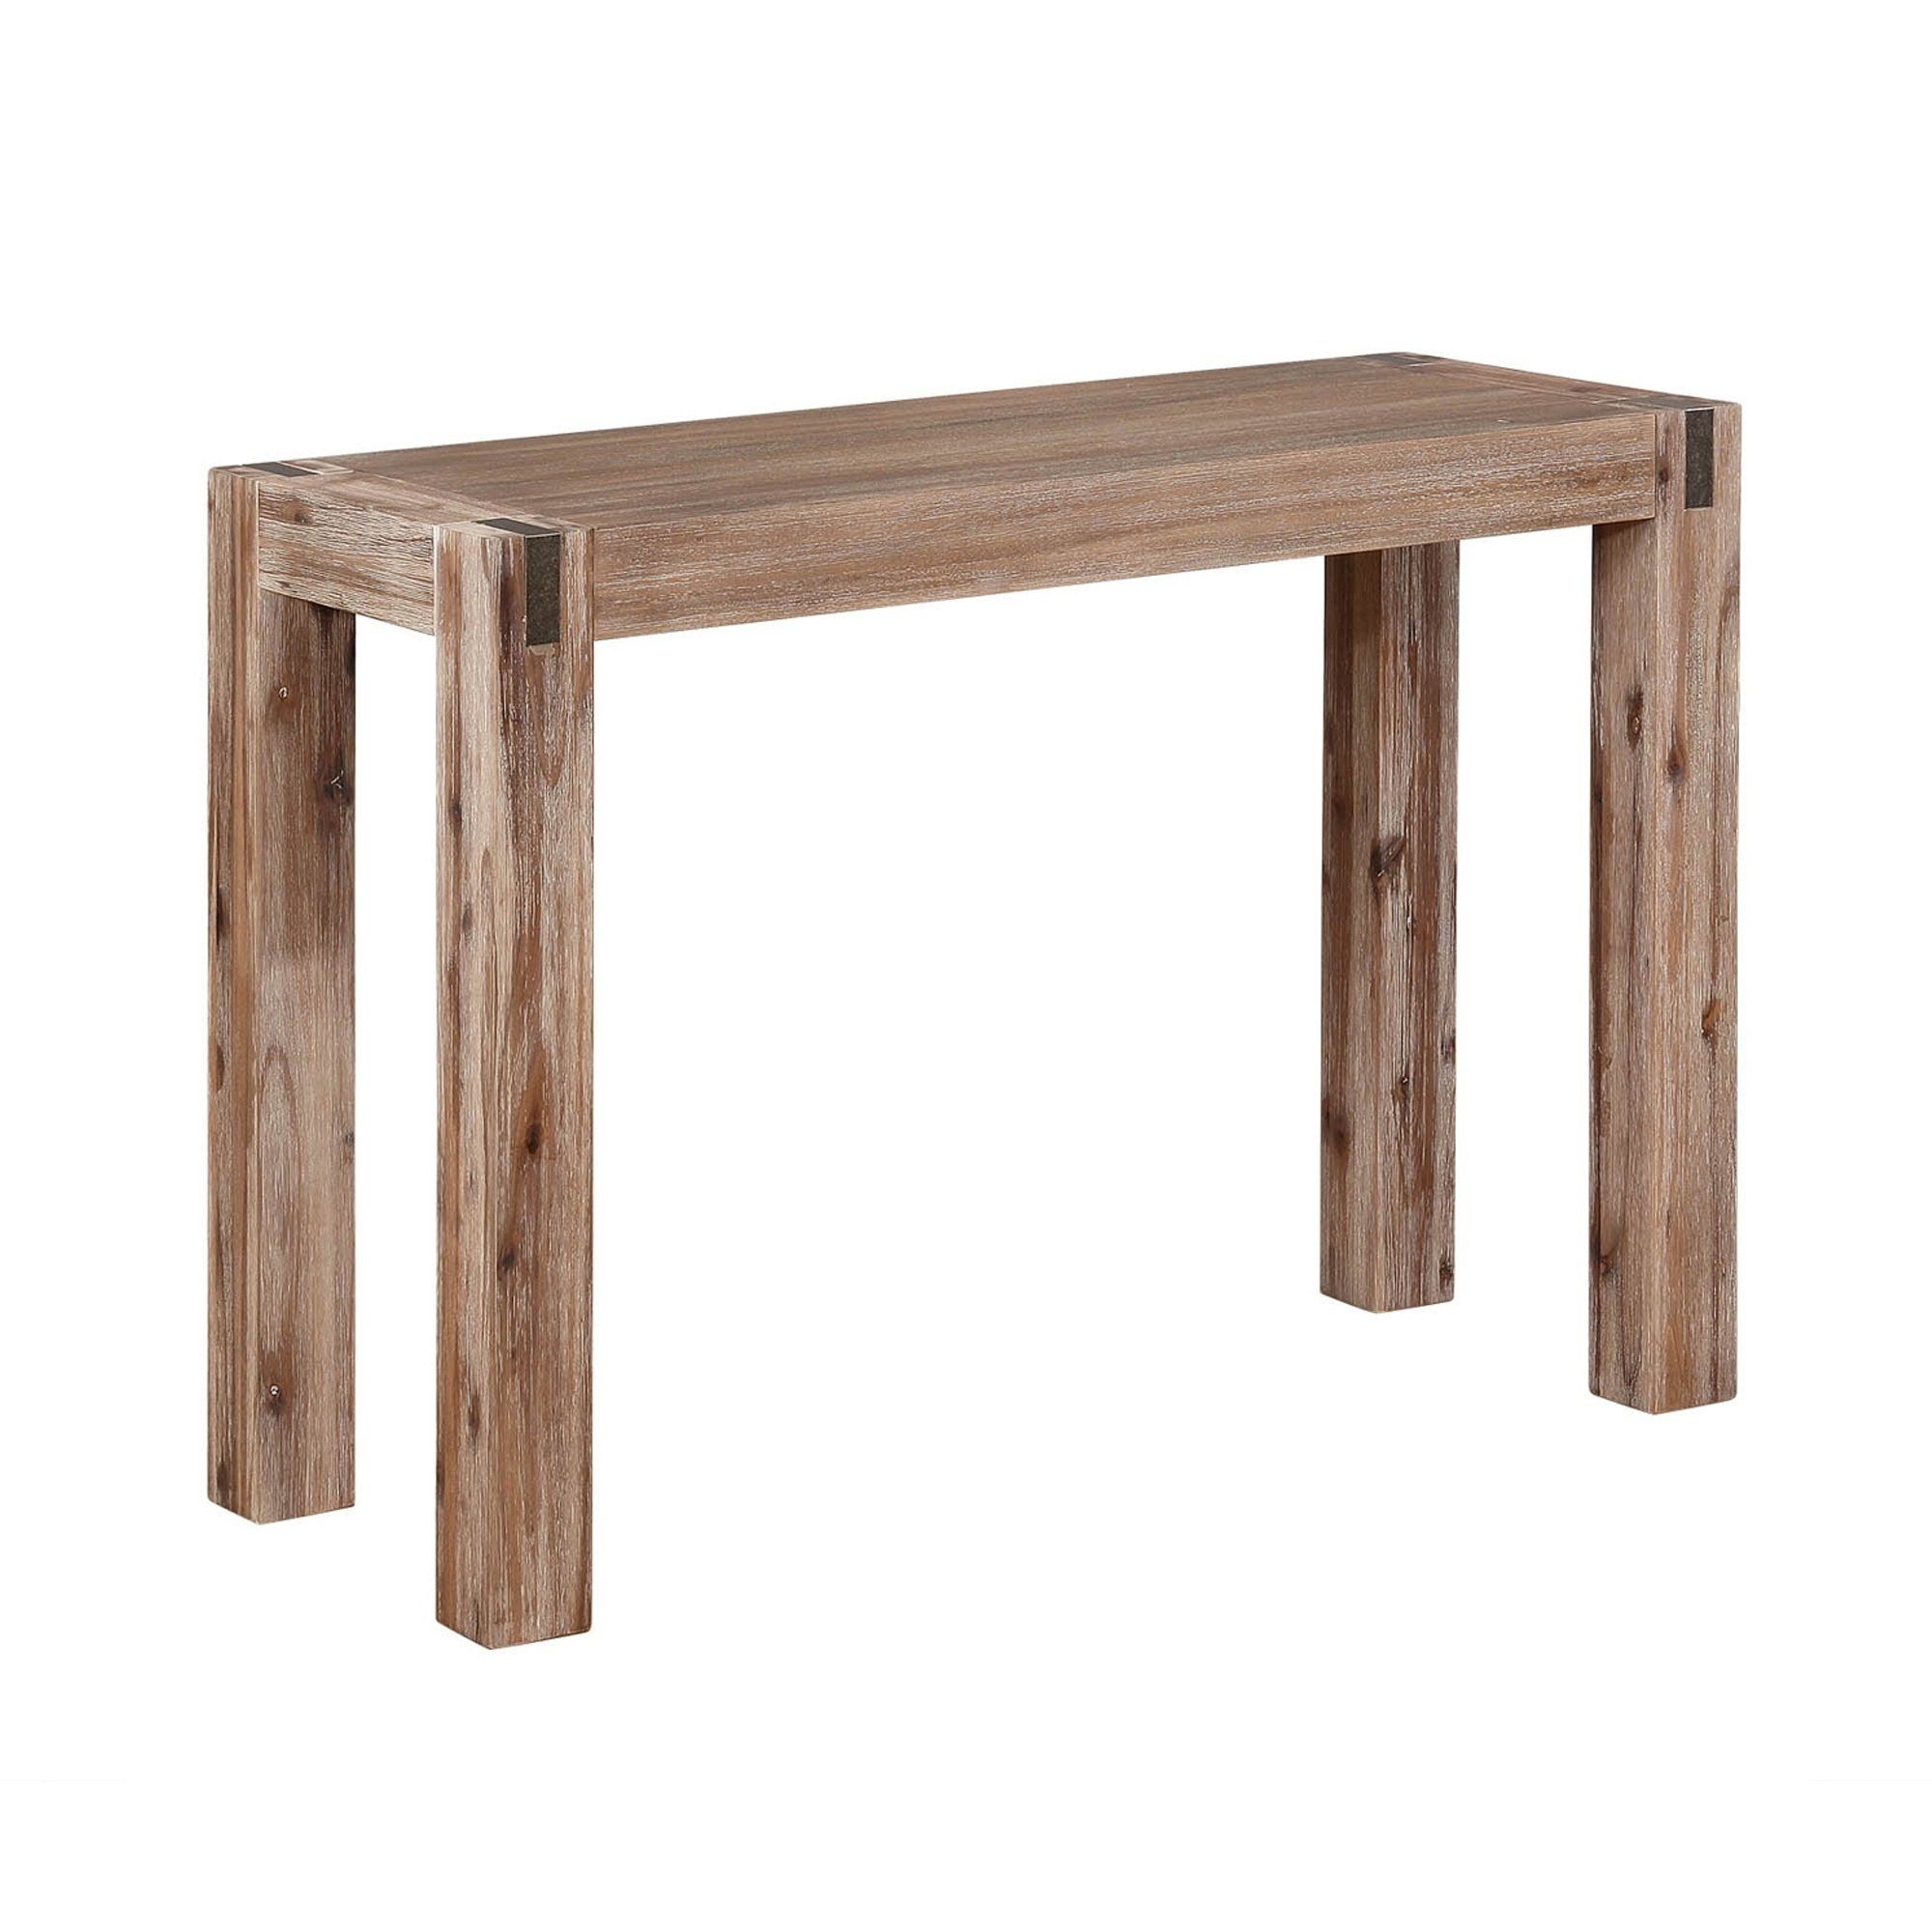 Shop Woodstock Acacia Wood With Metal Inset Media Console Table With Regard To Gunmetal Media Console Tables (View 22 of 30)